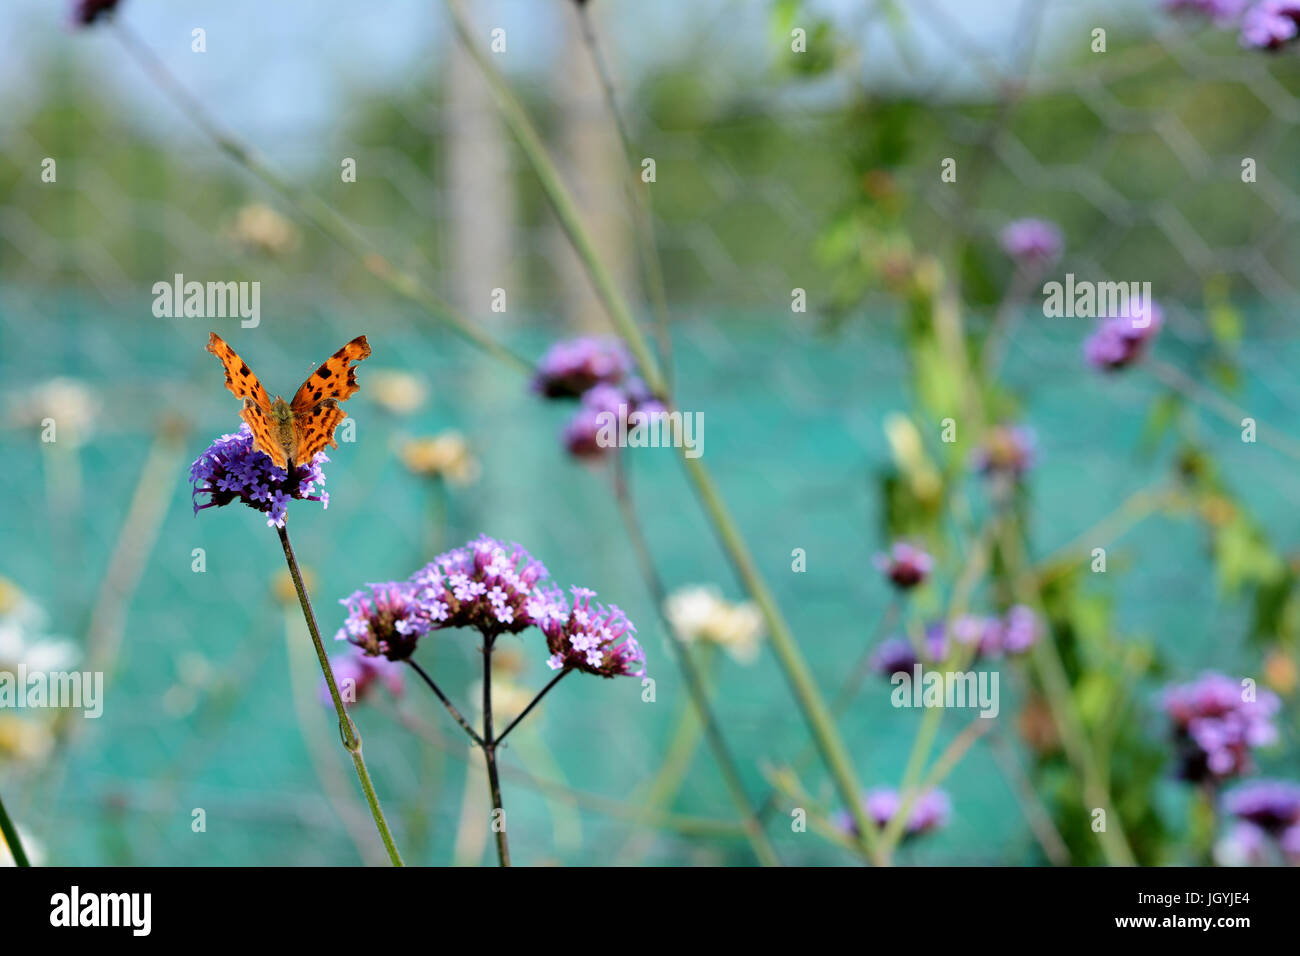 Comma butterfly with orange and brown wings sits on verbena flowers - selective focus and copy space Stock Photo